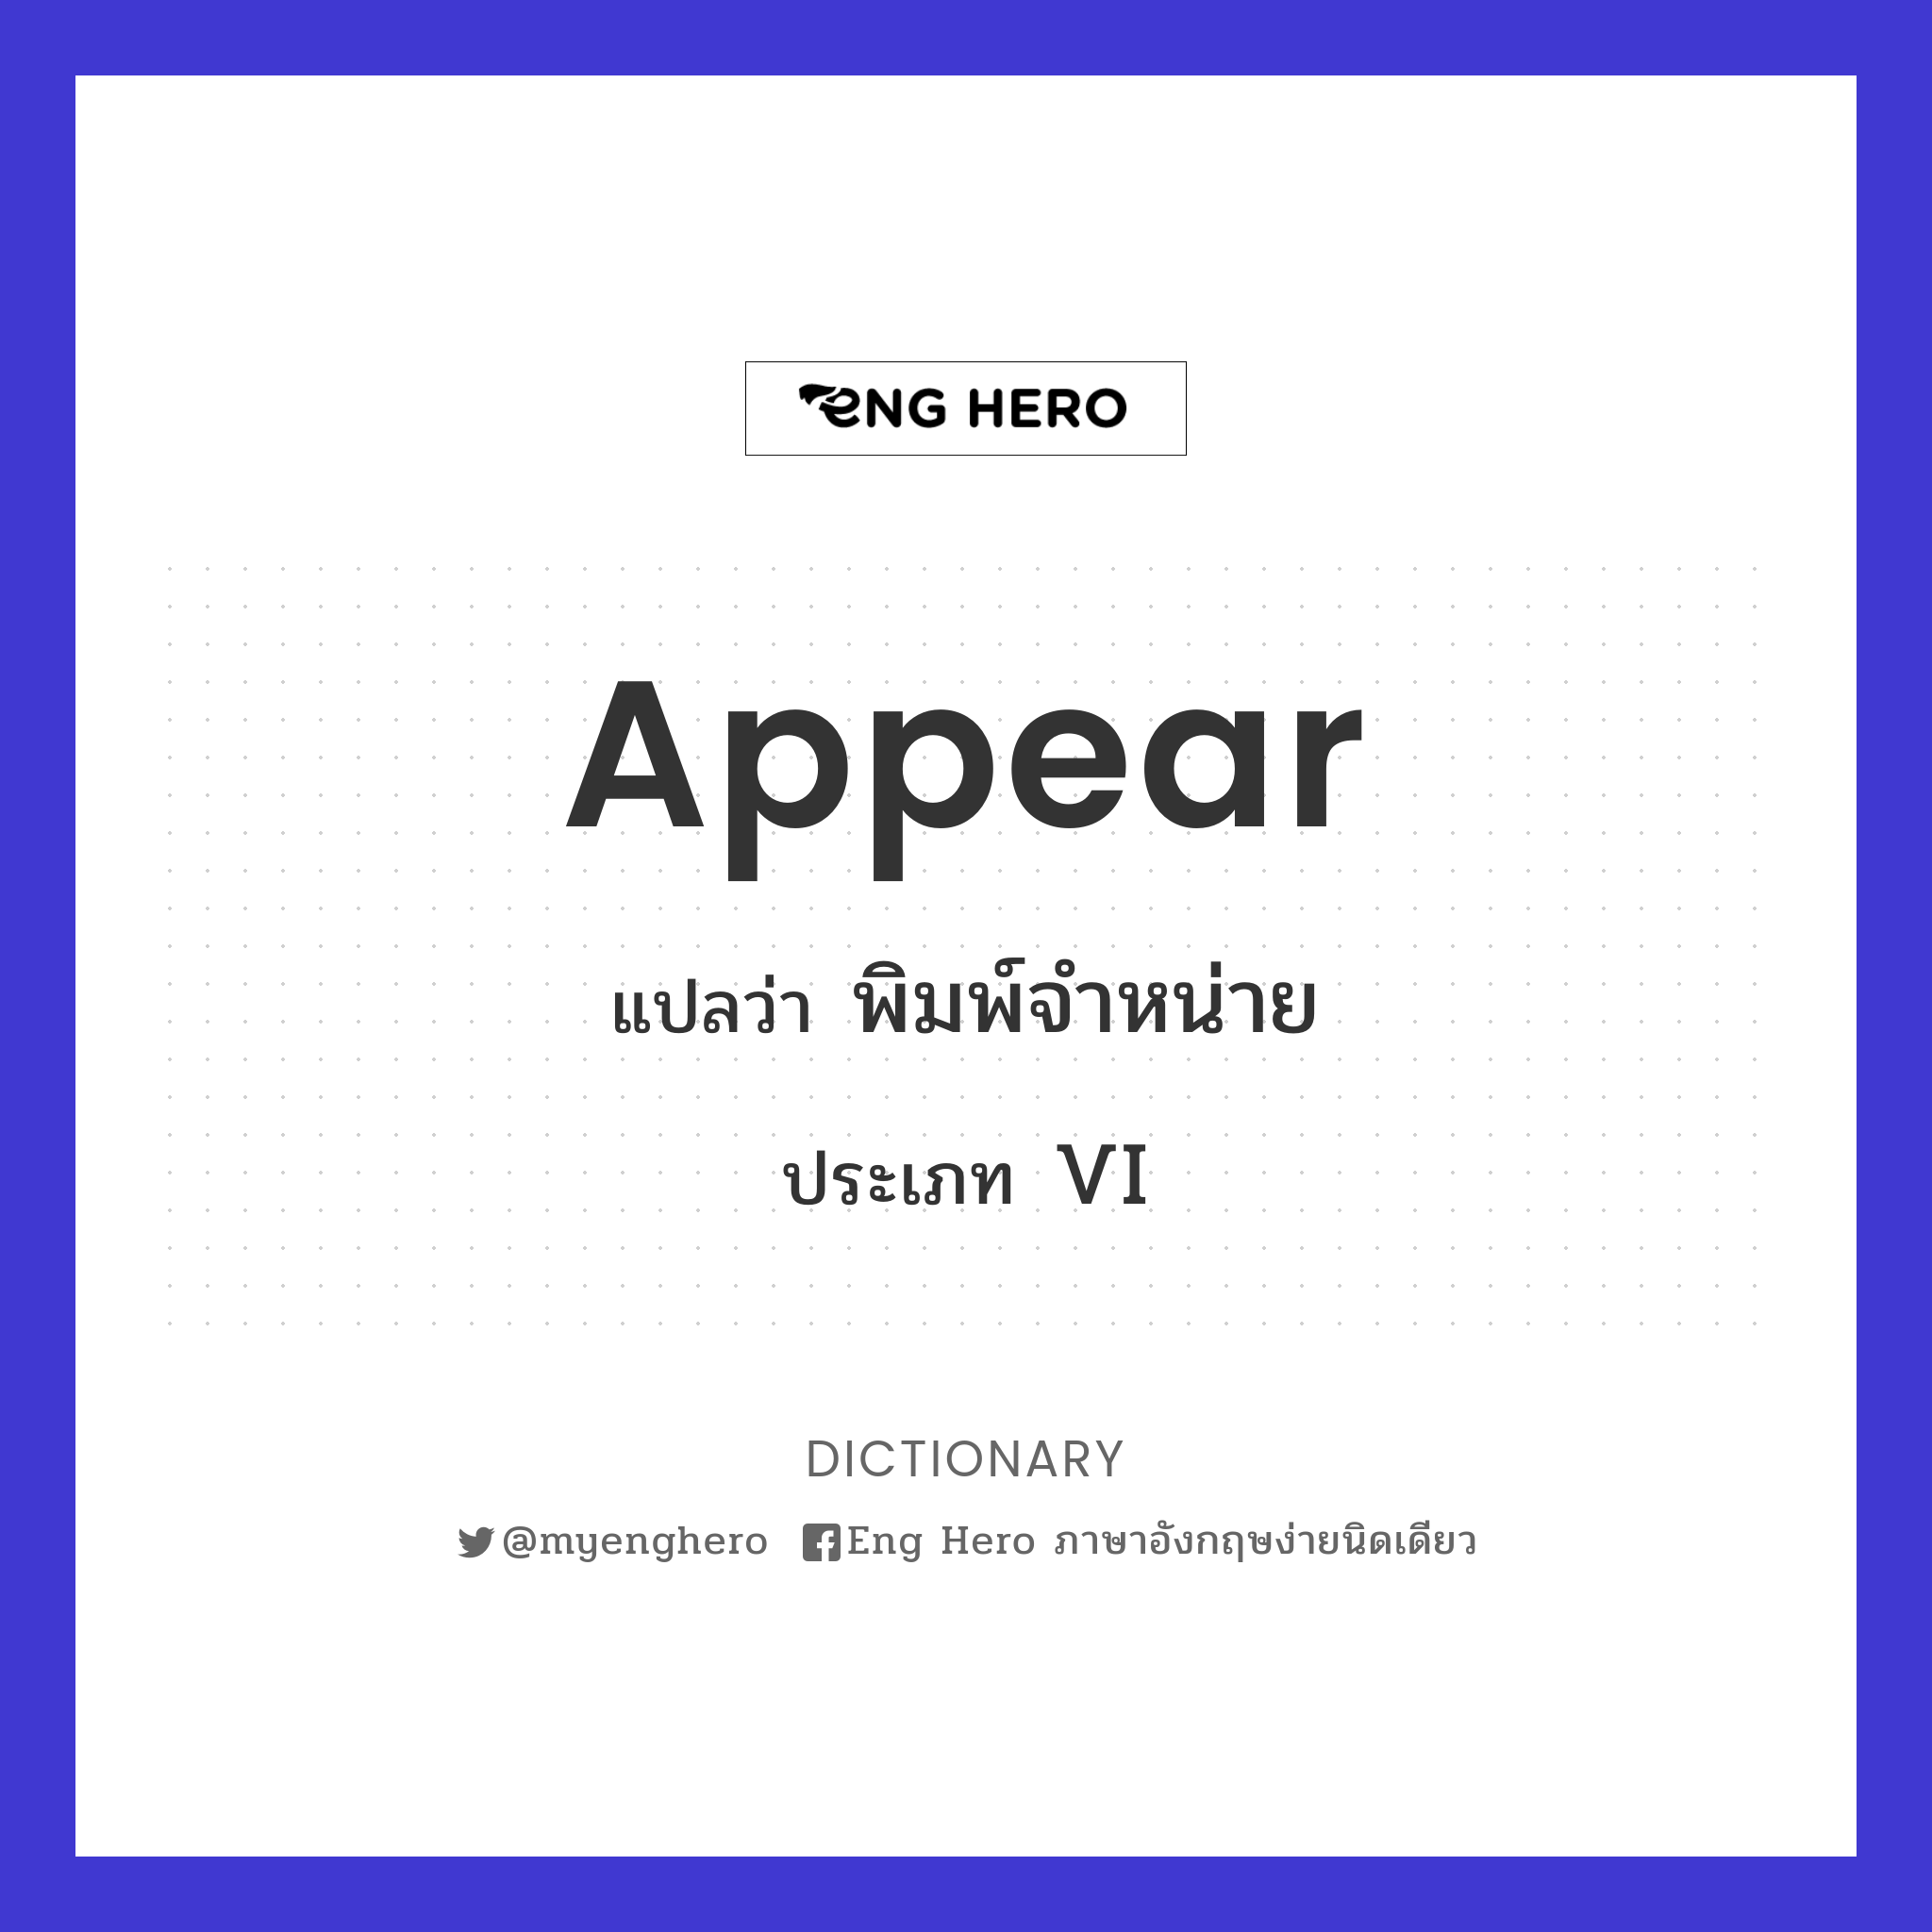 appear